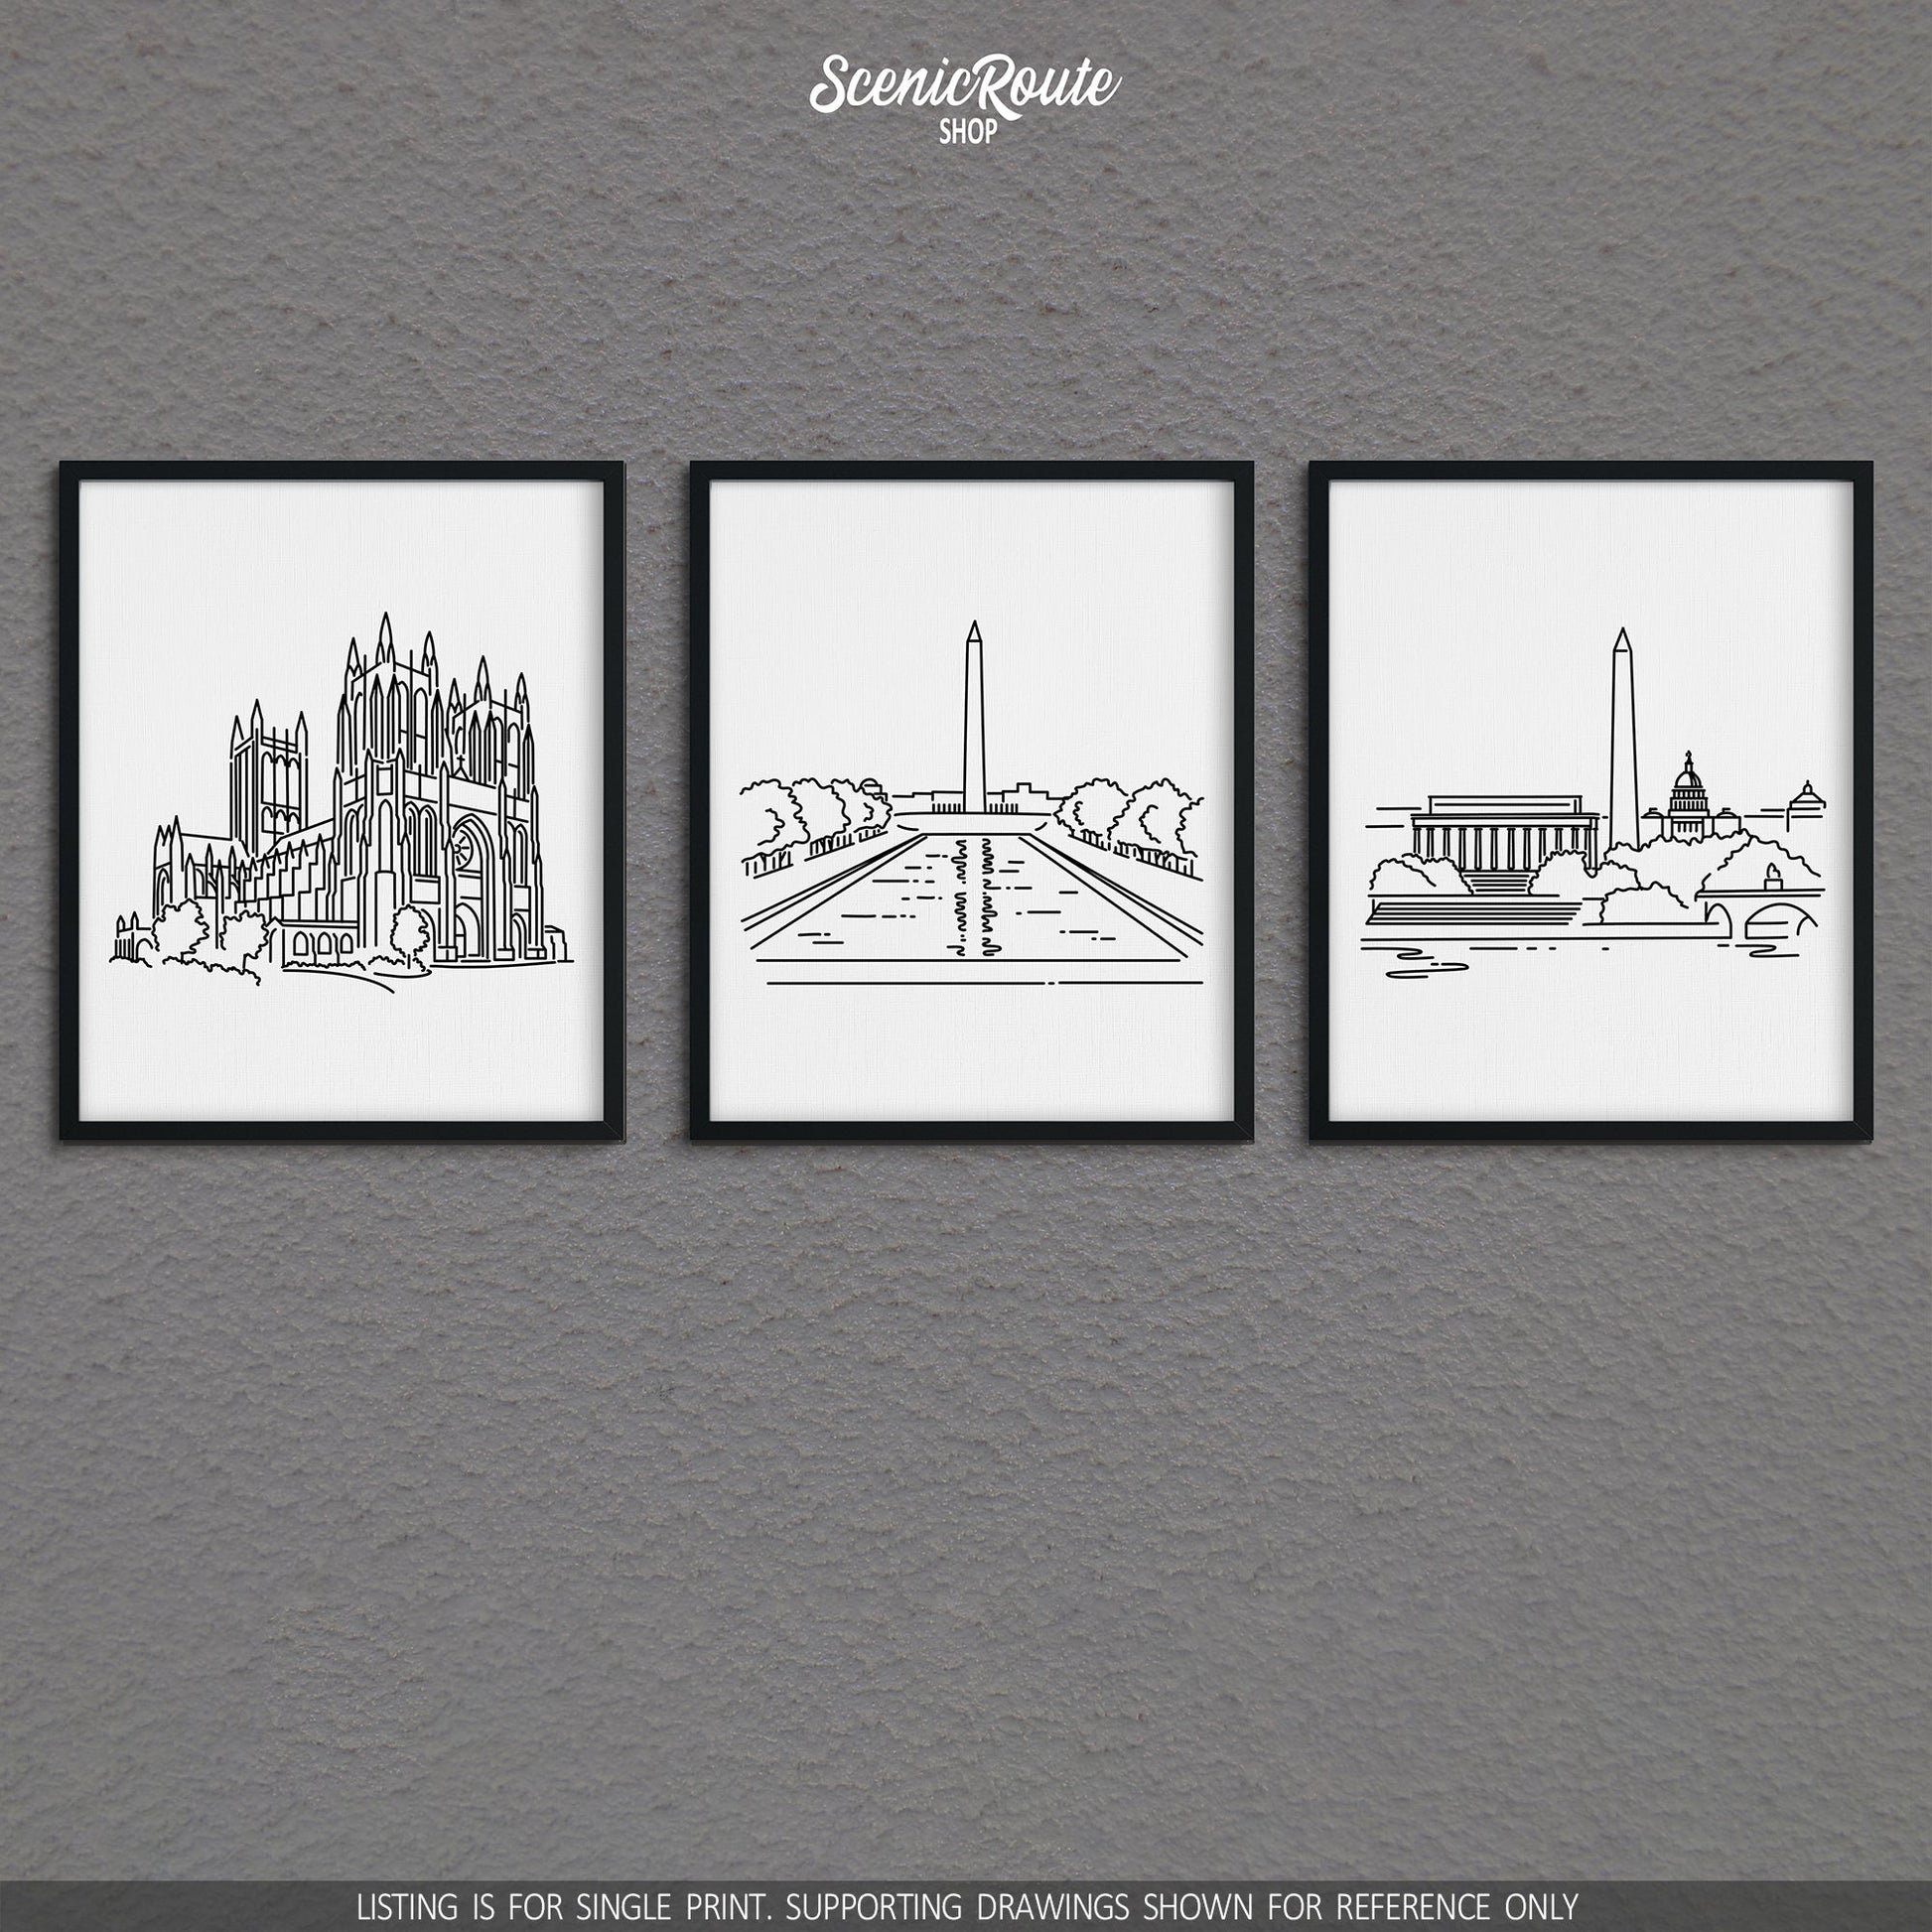 A group of three framed drawings on a gray wall. The line art drawings include the National Cathedral, National Mall, and Washington DC Skyline